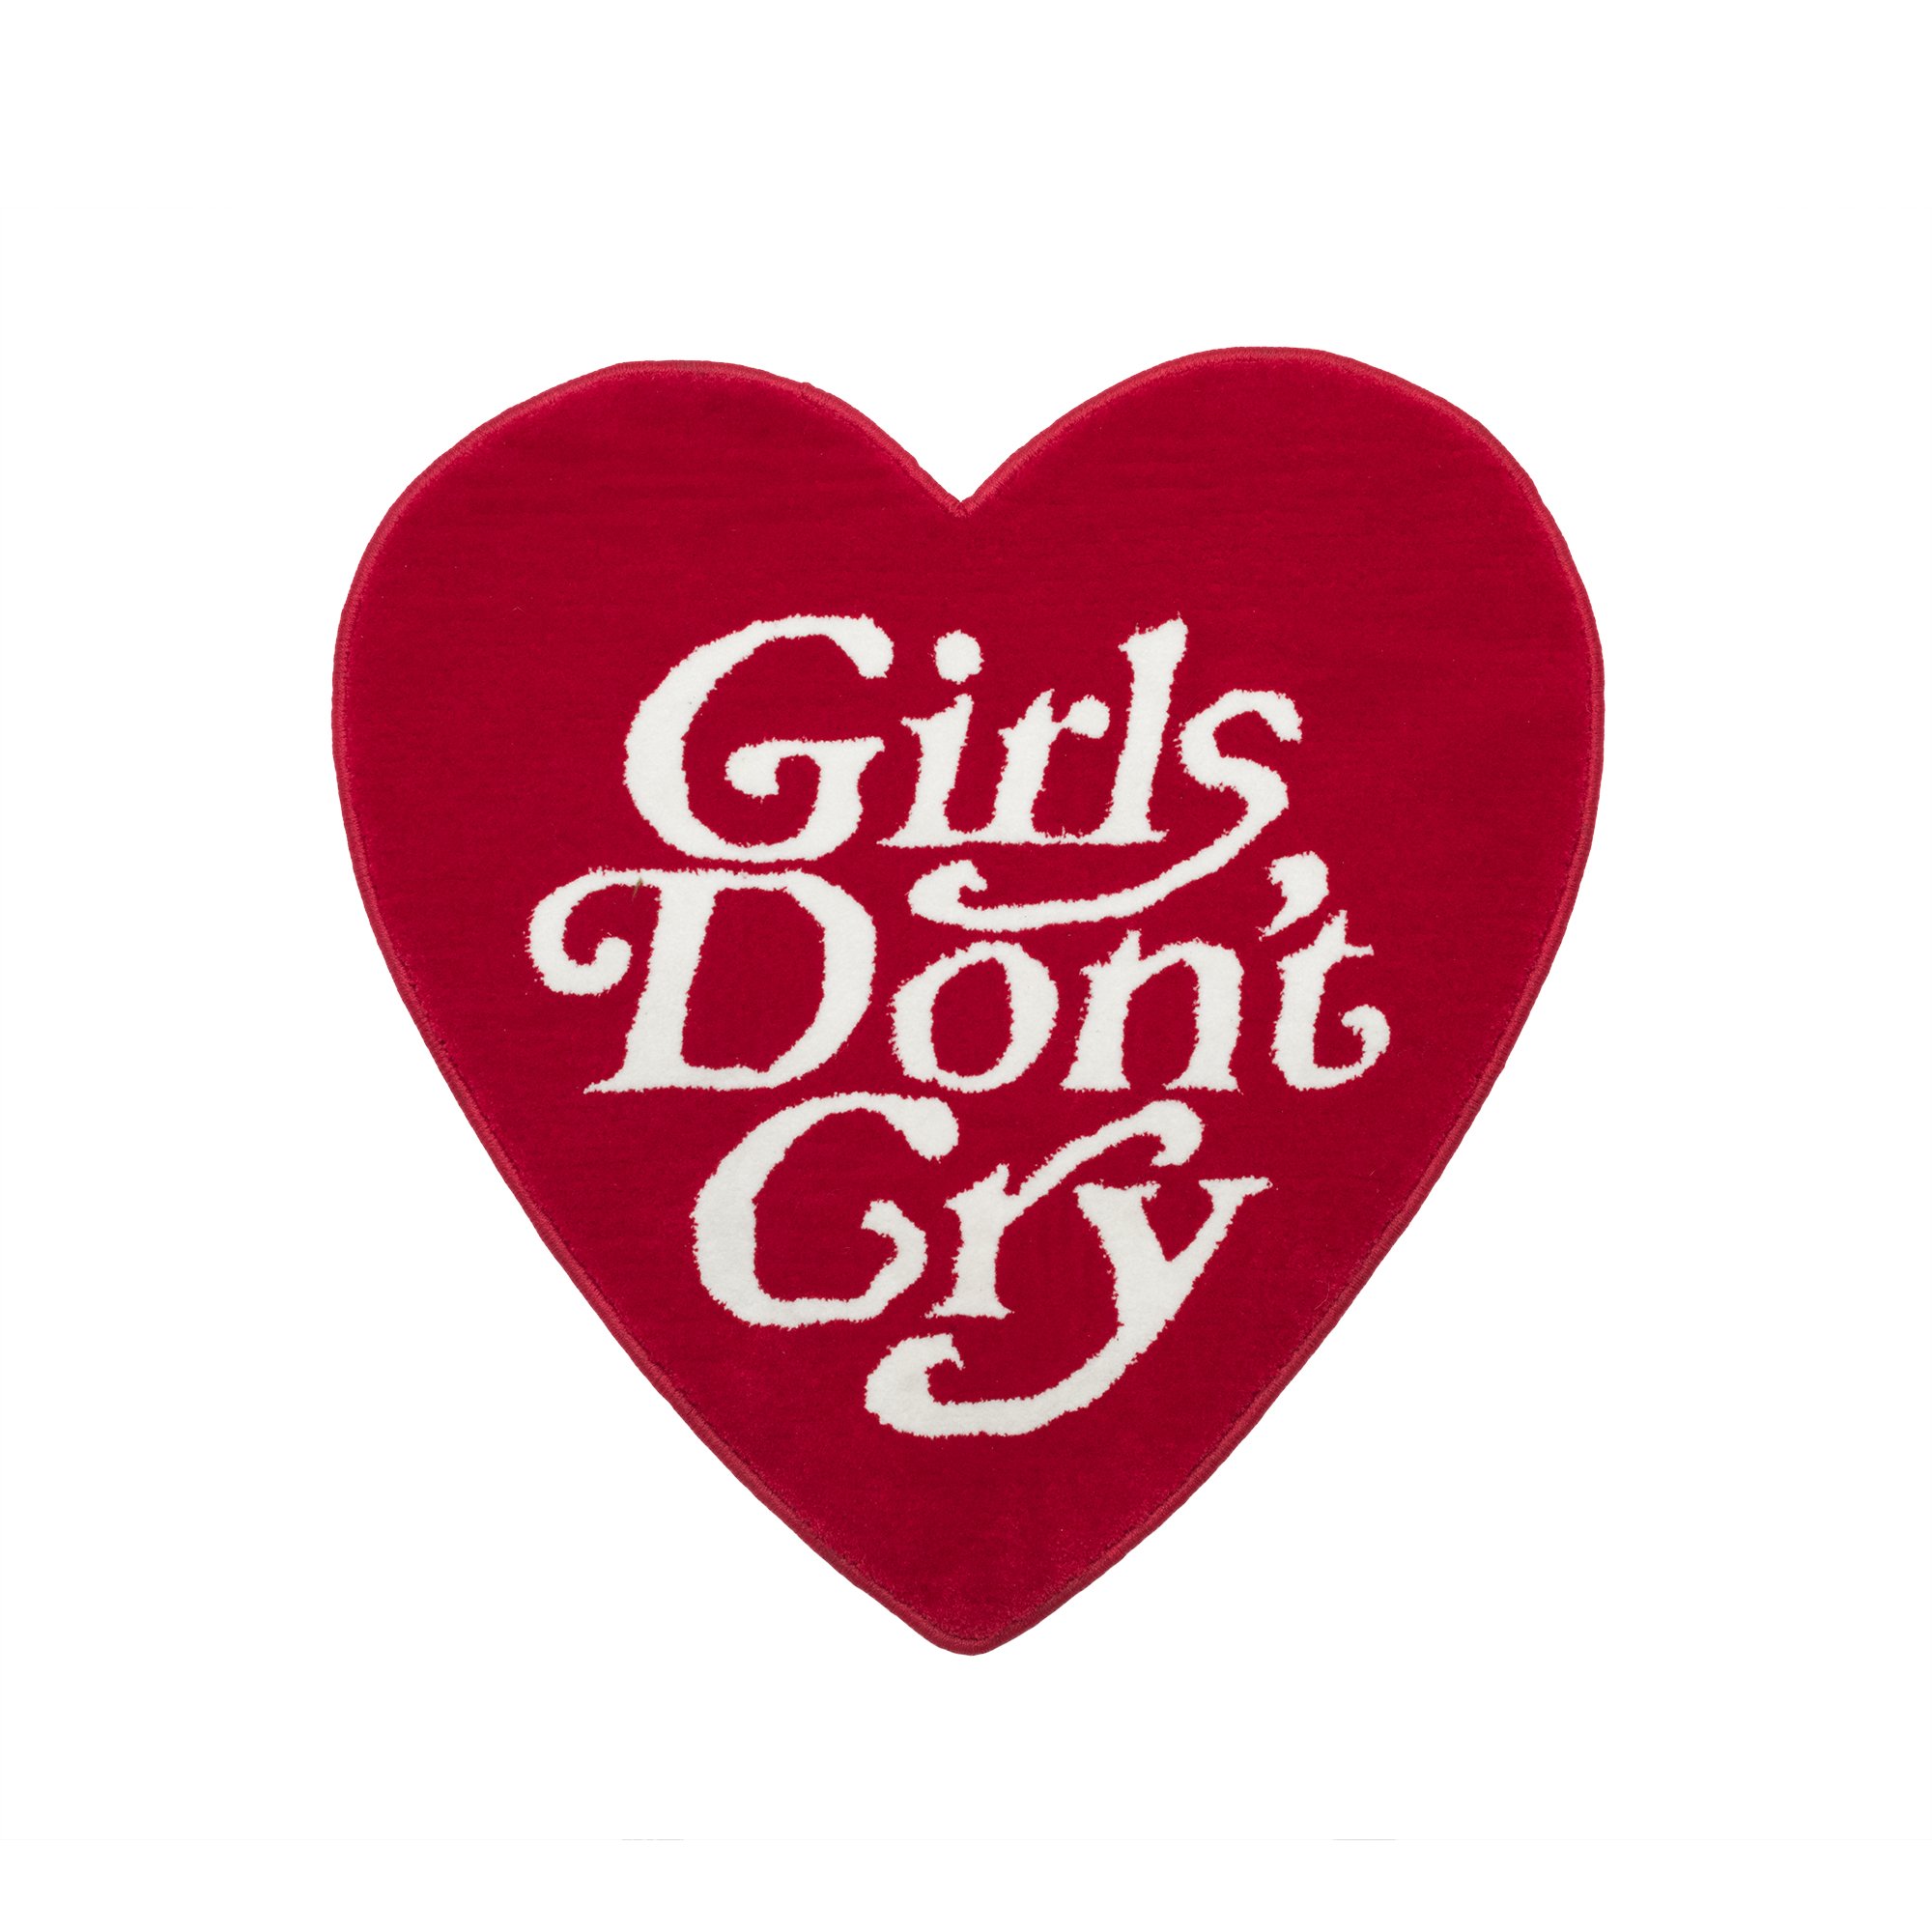 Verdy Human Made girls don't cryステッカー2枚 - その他